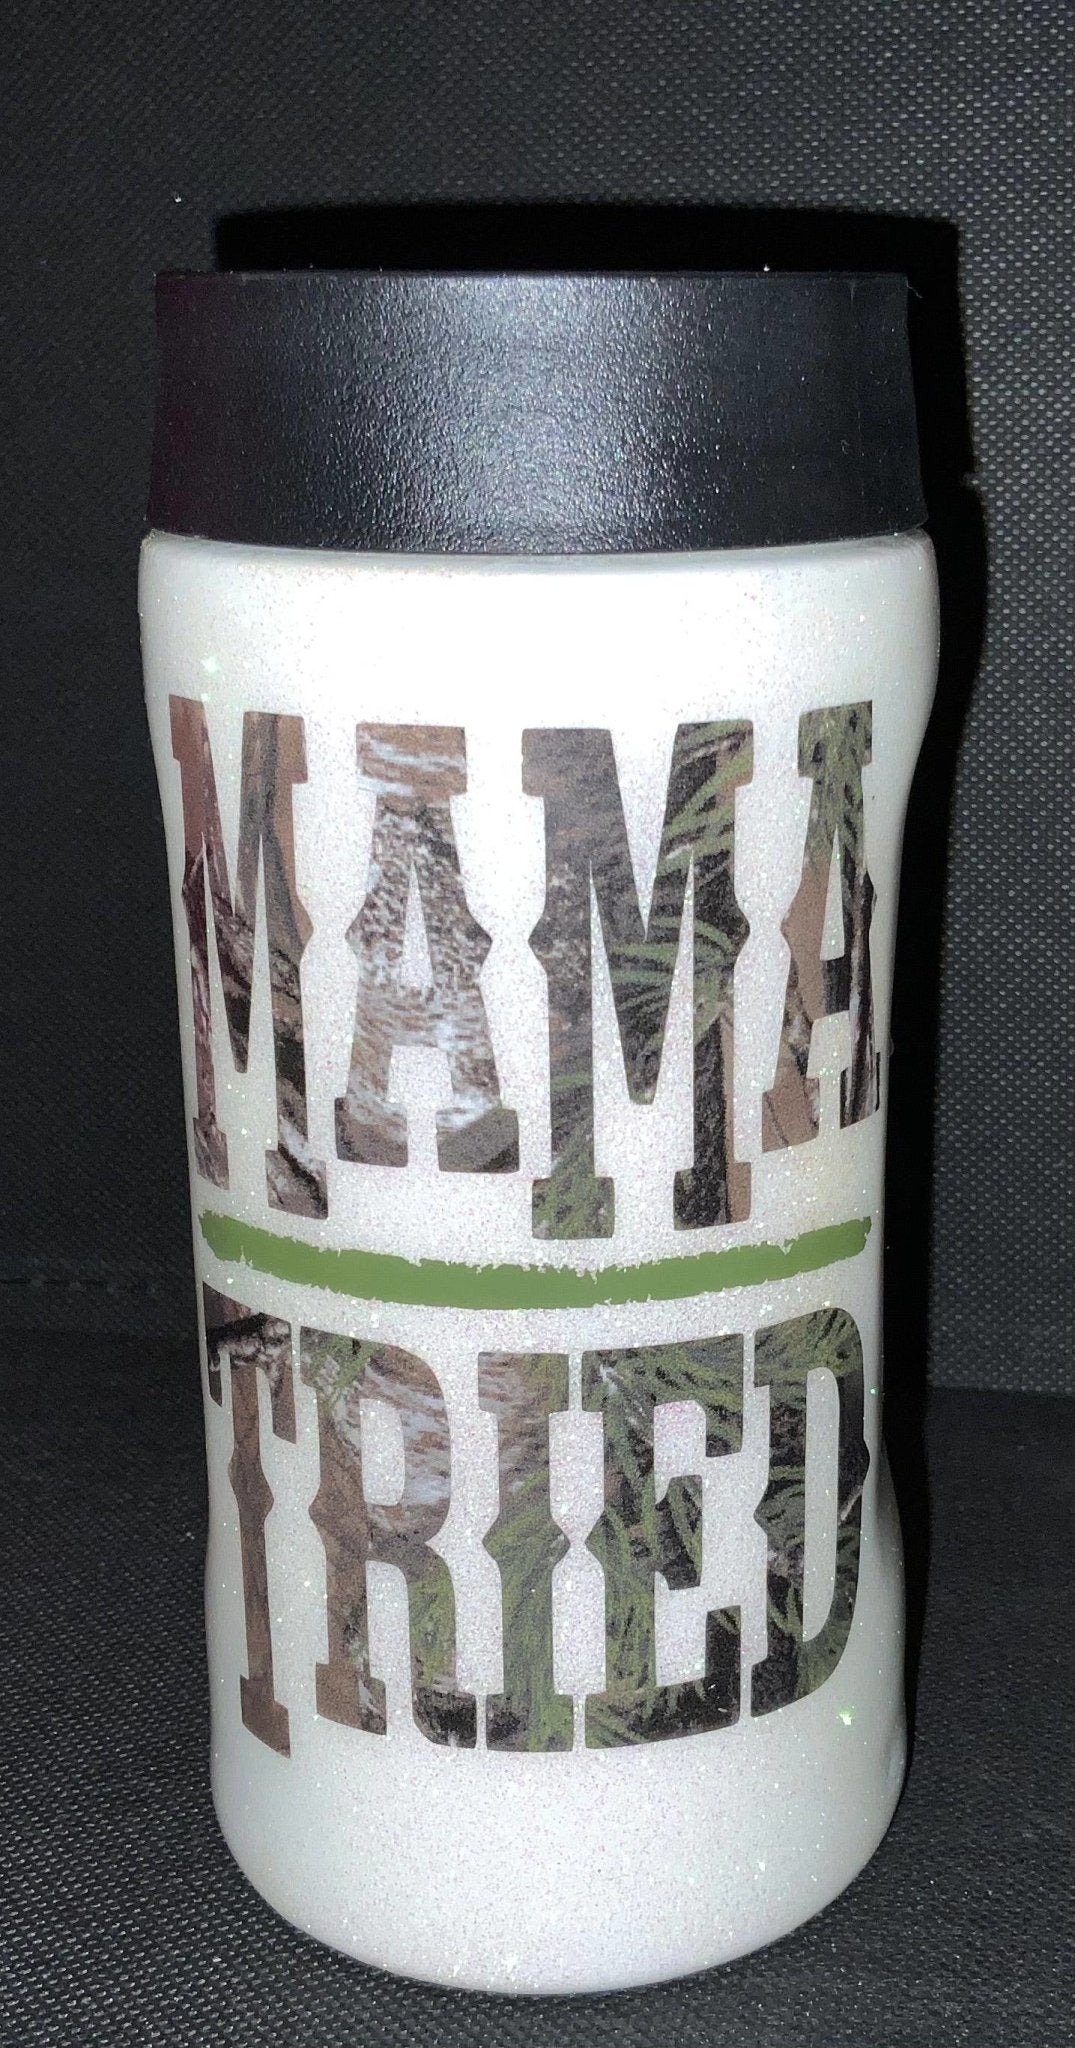 Mama Tried/Rebel - CountryFide Custom Accessories and Outdoors